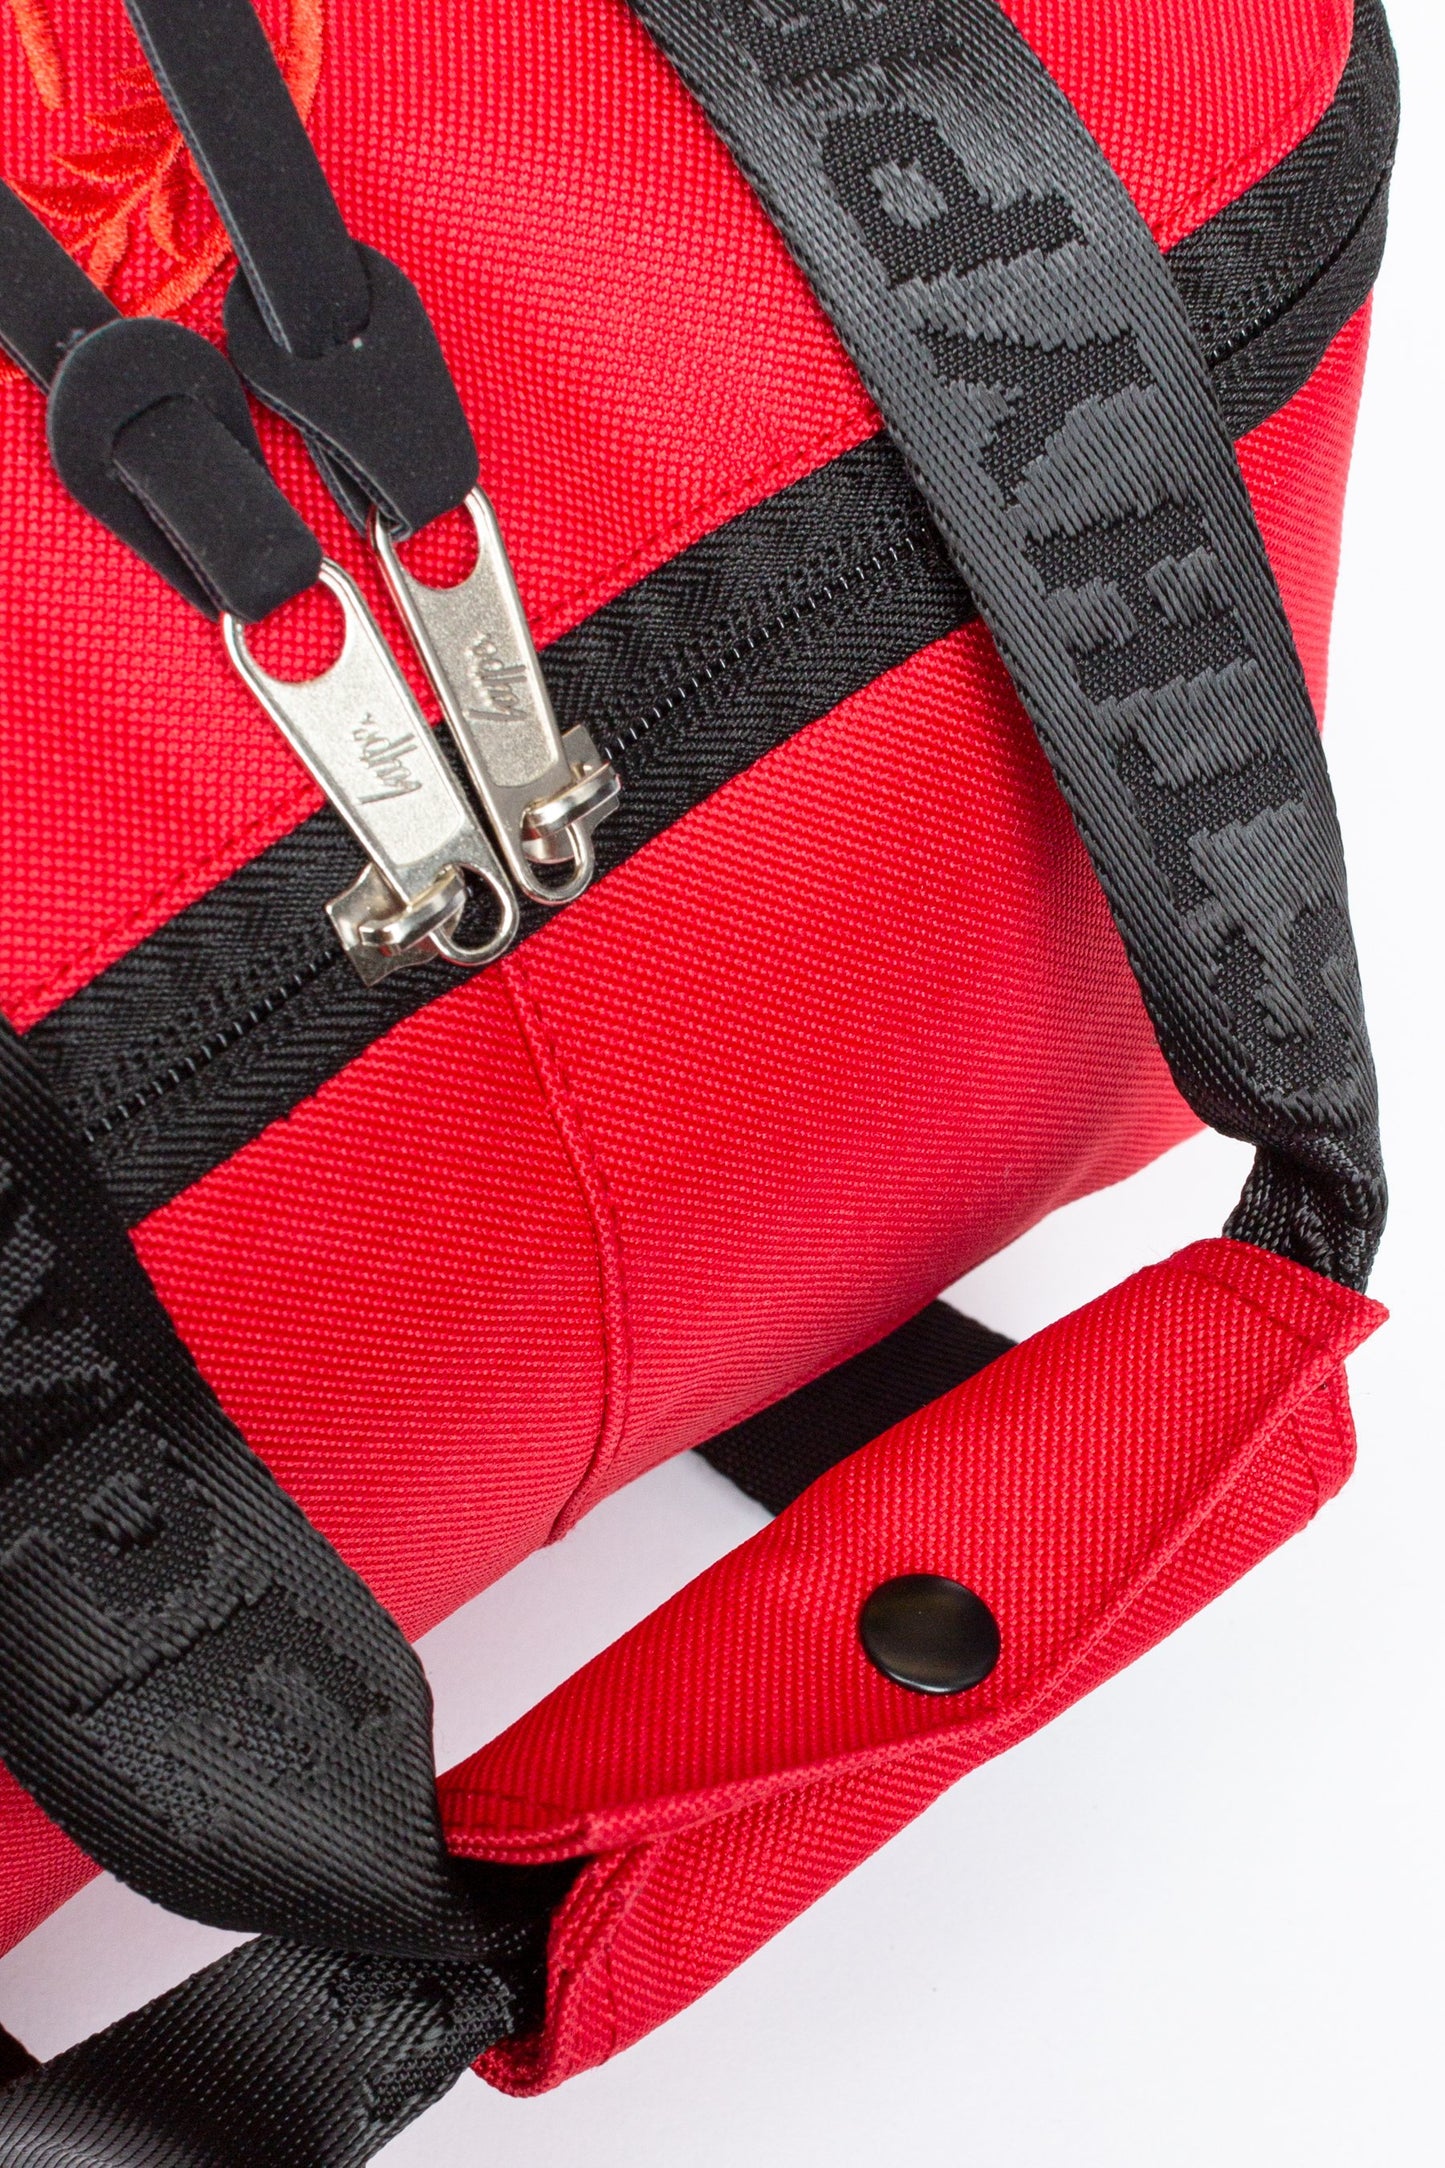 Hype Red Boxy Backpack